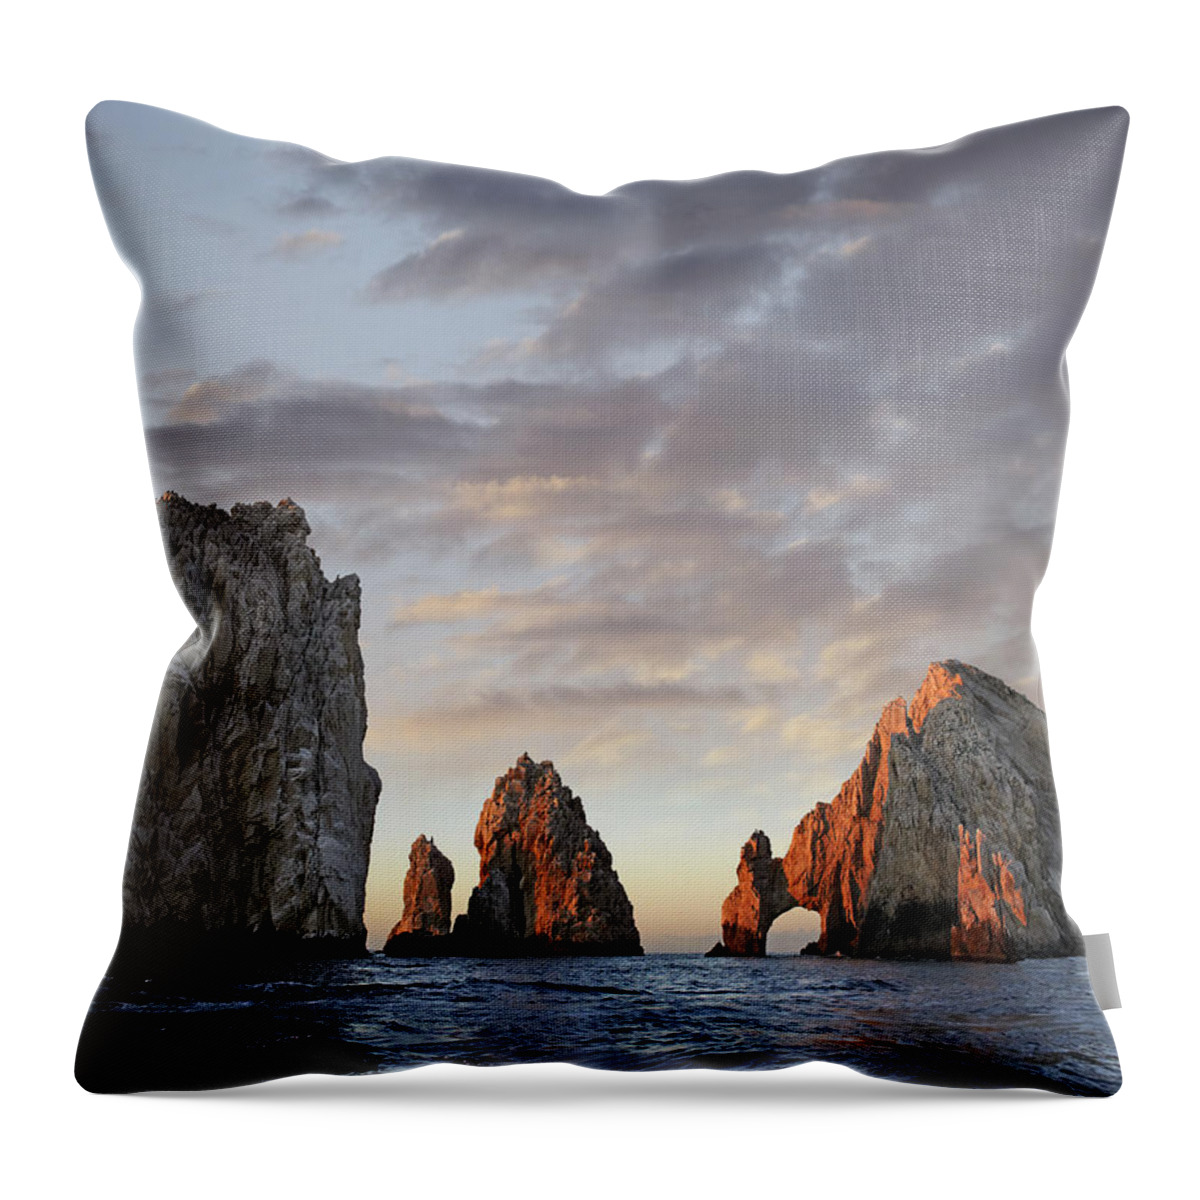 00441440 Throw Pillow featuring the photograph El Arco And Sea Stacks Cabo San Lucas by Tim Fitzharris